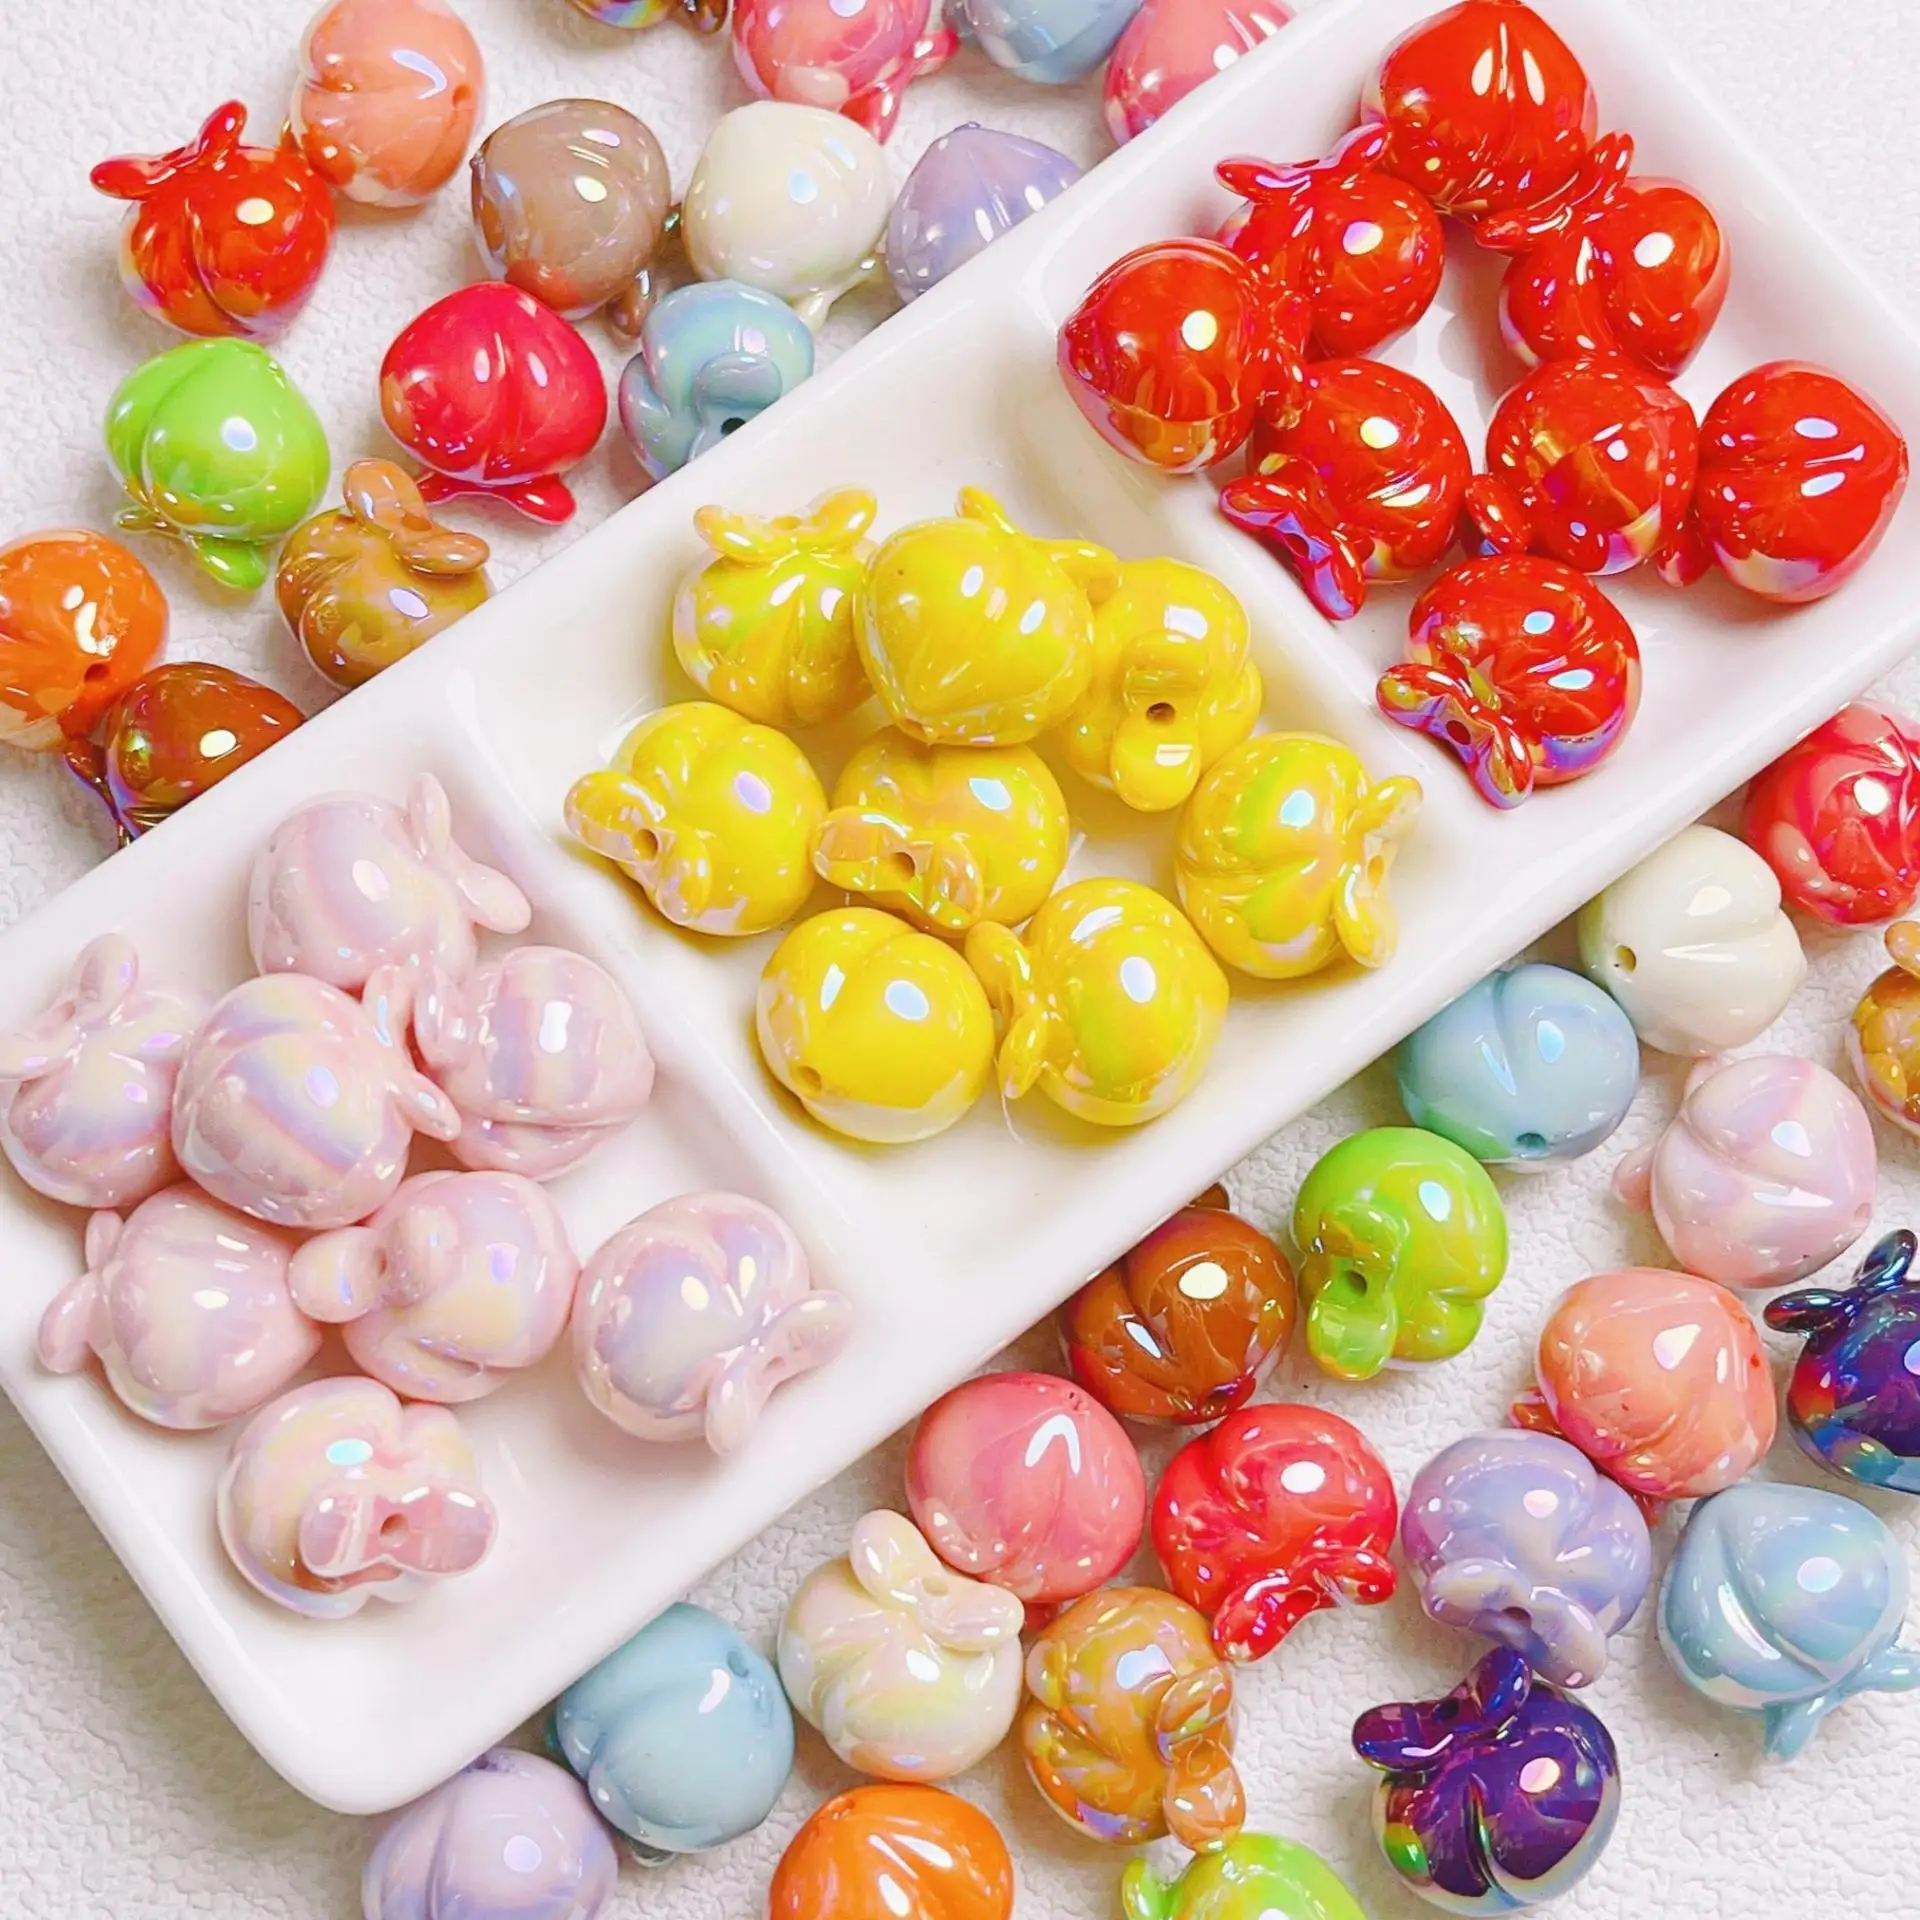 

Newest 80pcs 16mm AB Colors Fruit Peach Shape Acrylic Jewelry Beads Ornament Accessory Material Necklace Bracelet Earring Decor